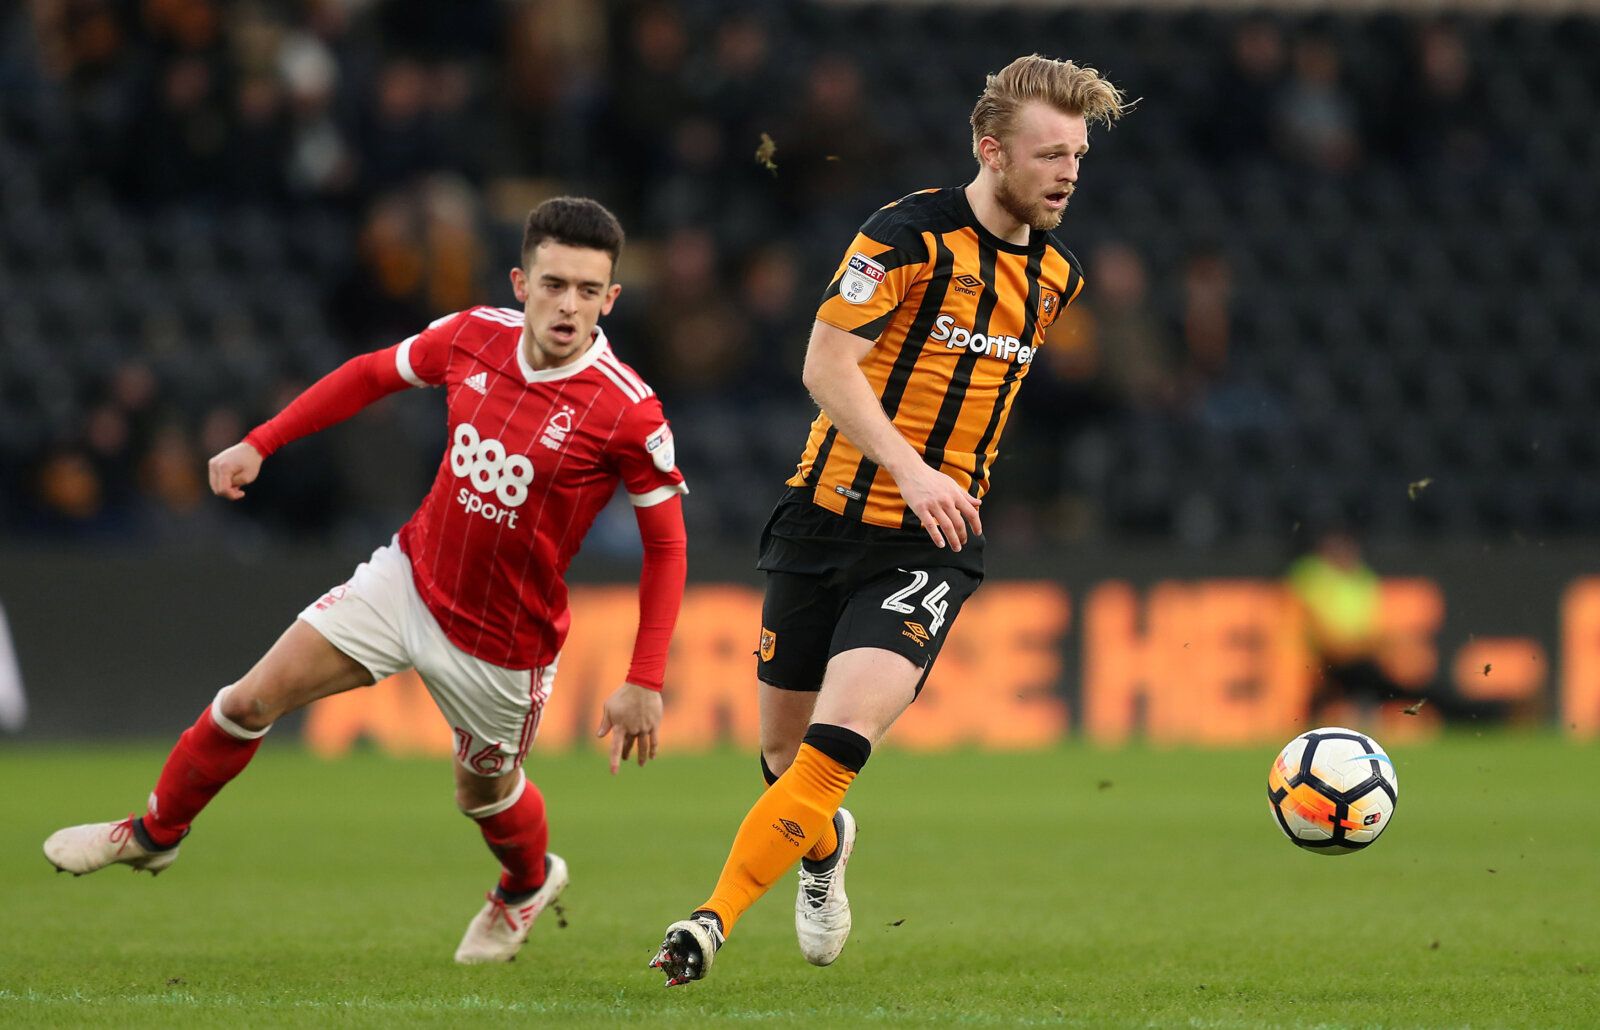 Soccer Football - FA Cup Fourth Round - Hull City vs Nottingham Forest - KCOM Stadium, Hull, Britain - January 27, 2018   Hull City’s Max Clark in action with Nottingham Forest’s Zach Clough   Action Images/John Clifton